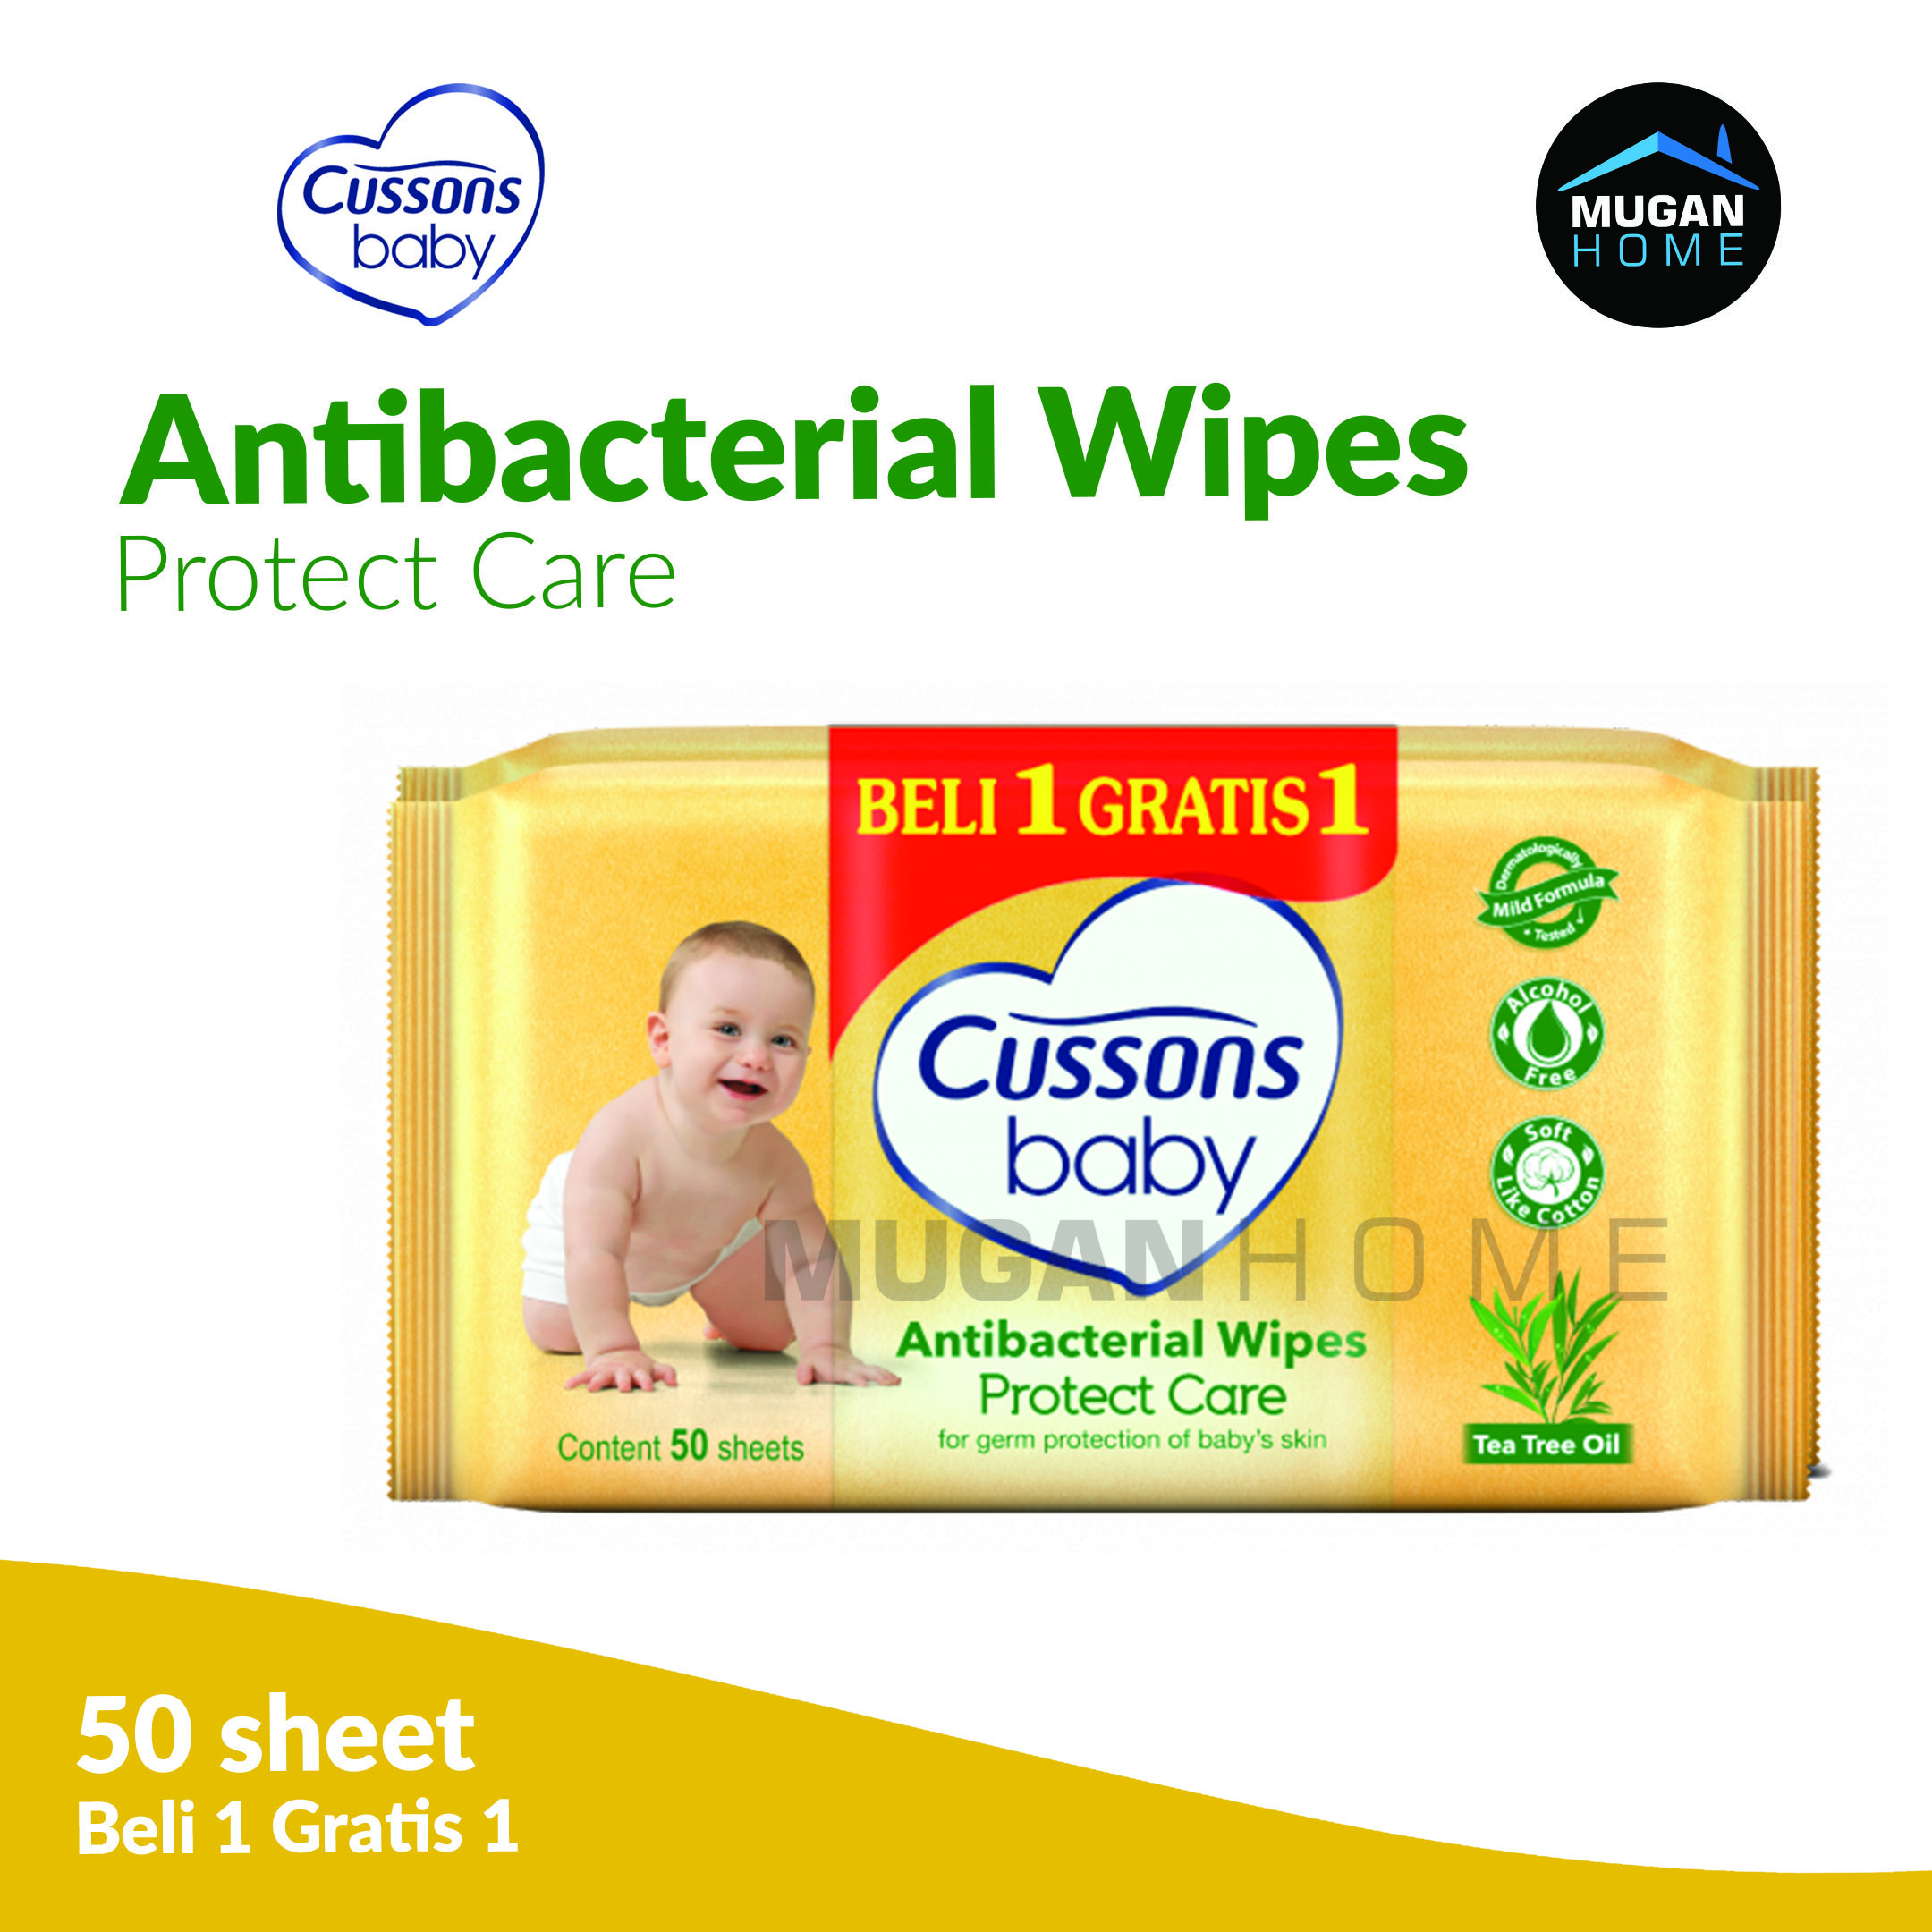 CUSSONS BABY ANTIBACTERIAL WIPES 50SHEETS PROTECT CARE BUY 1 GET 1